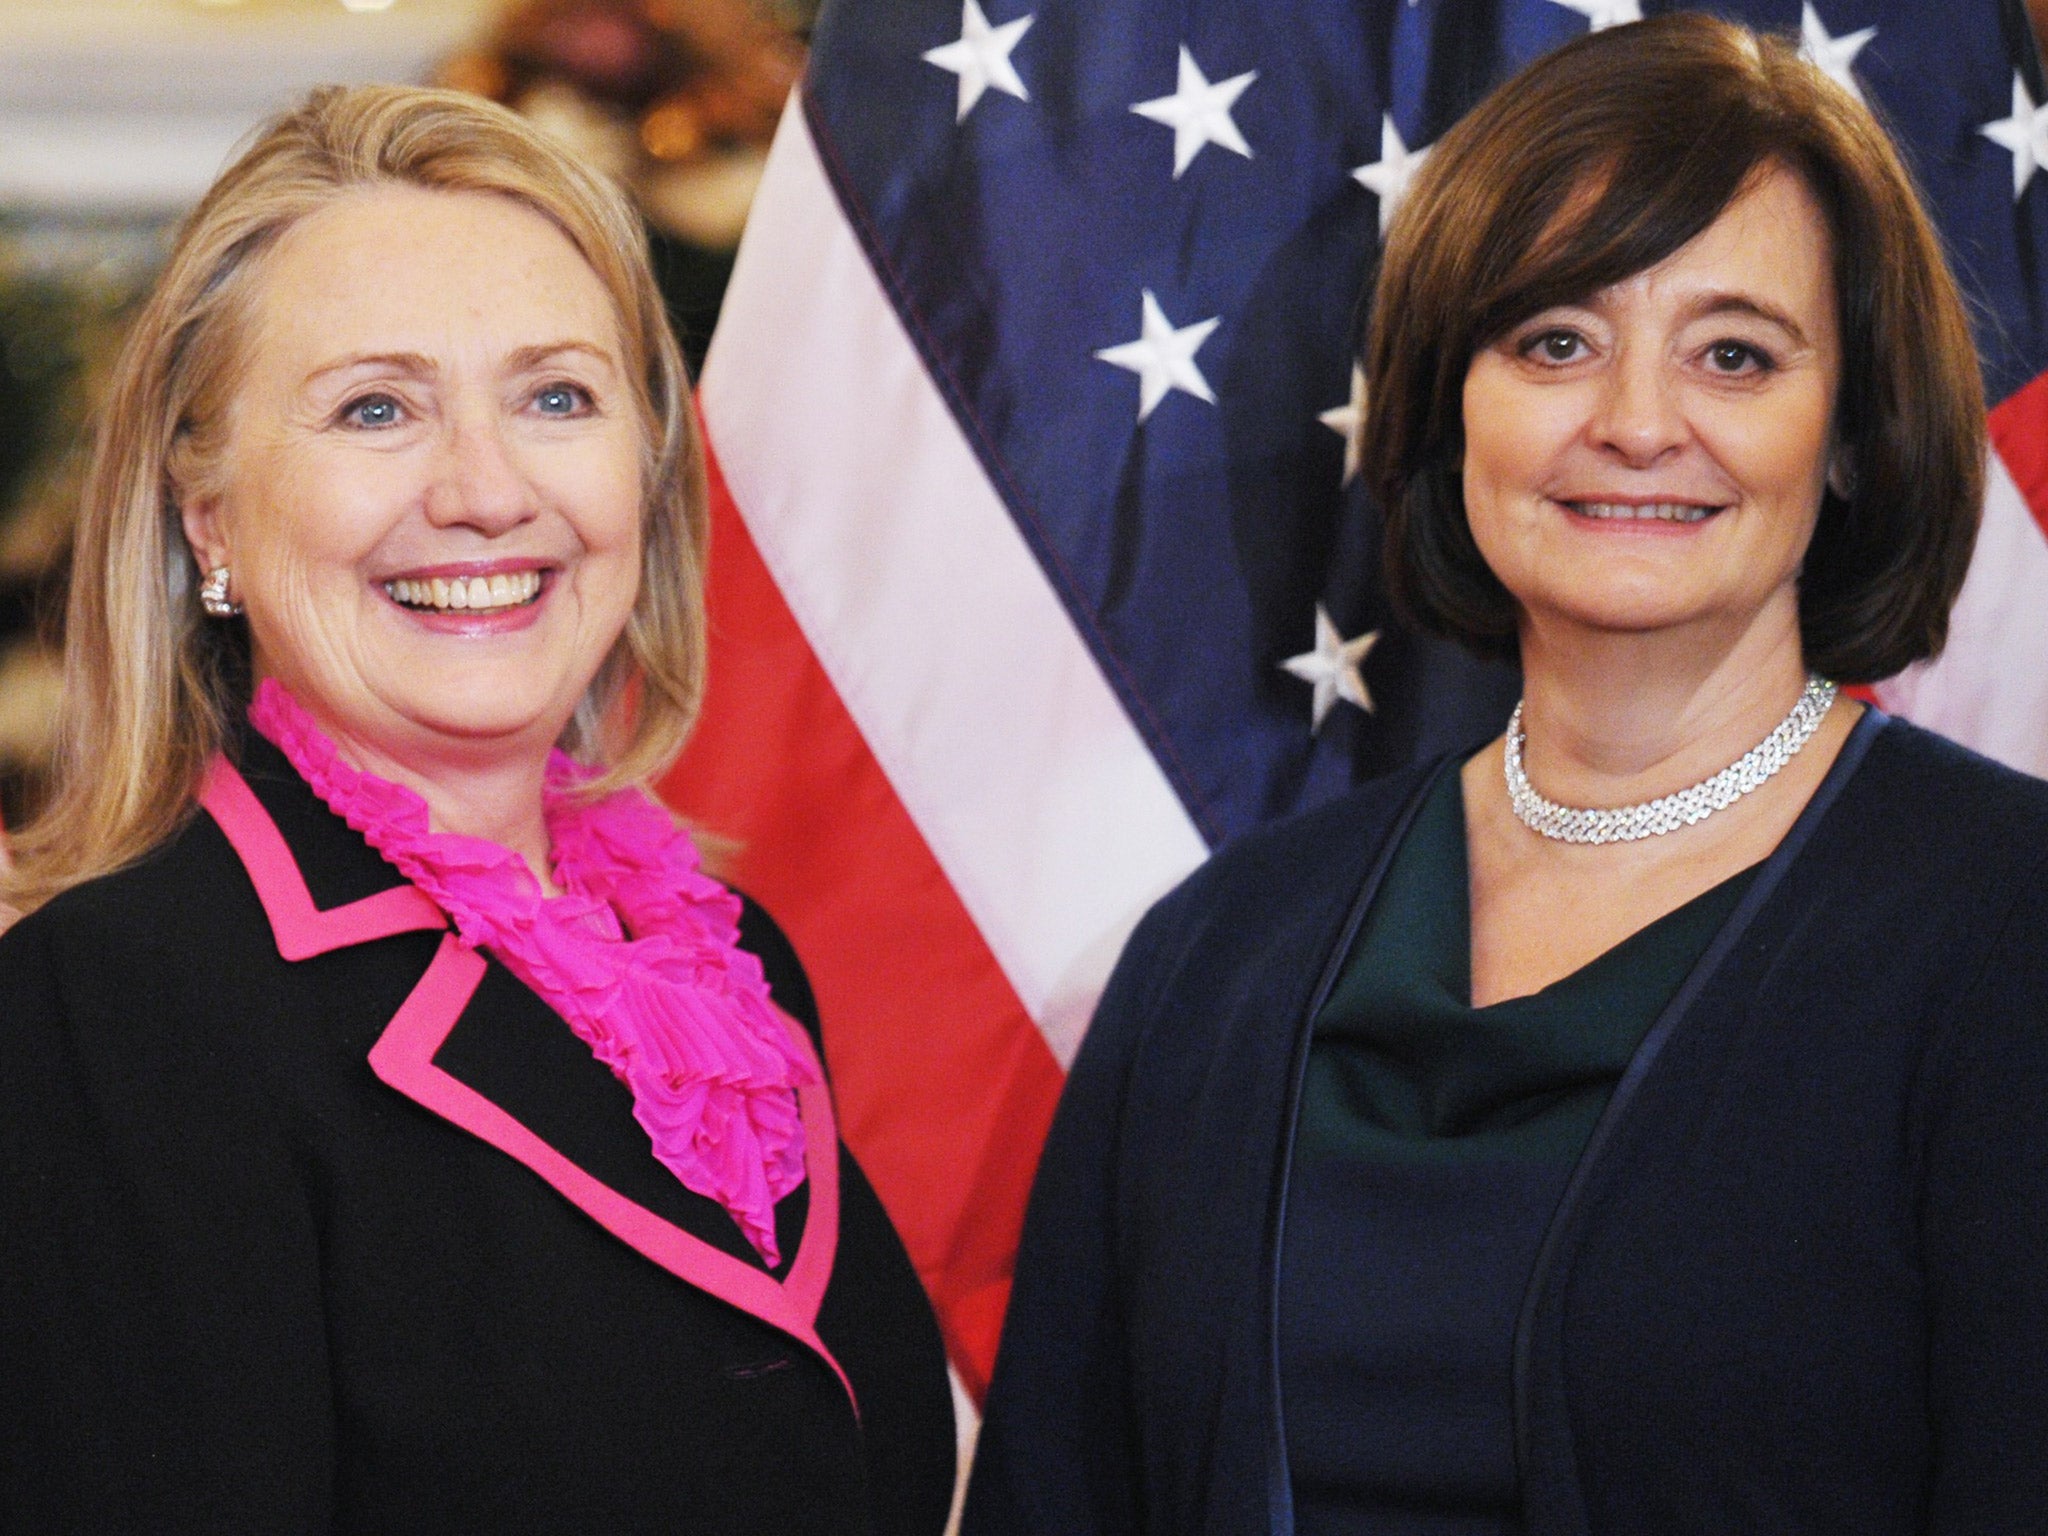 Hillary Clinton and Cherie Blair at the 2012 International Council on Women's Business Leadership